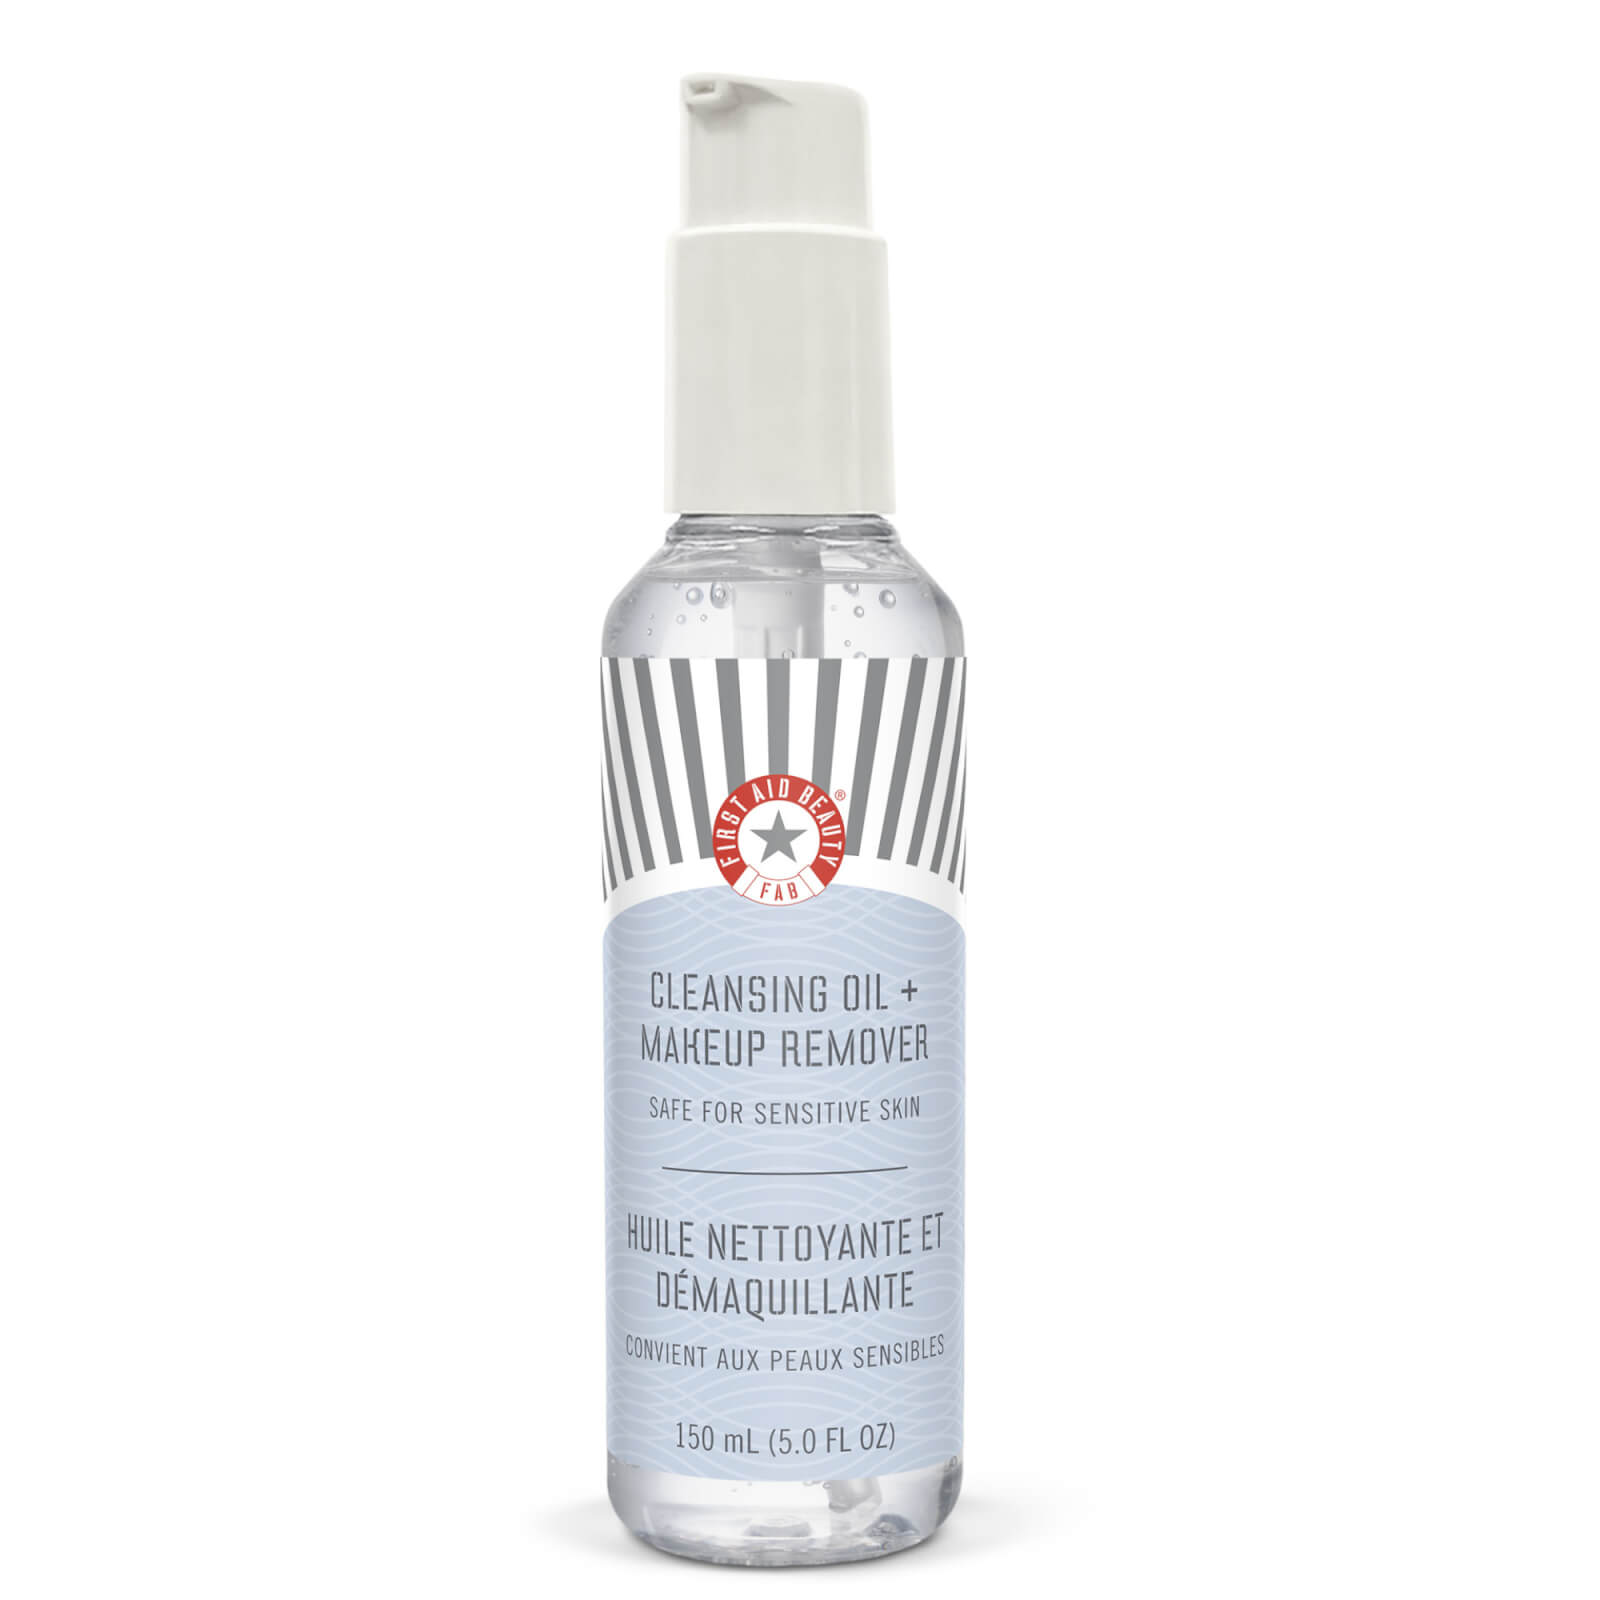 First Aid Beauty Cleansing Oil and Makeup Remover 150ml lookfantastic.com imagine